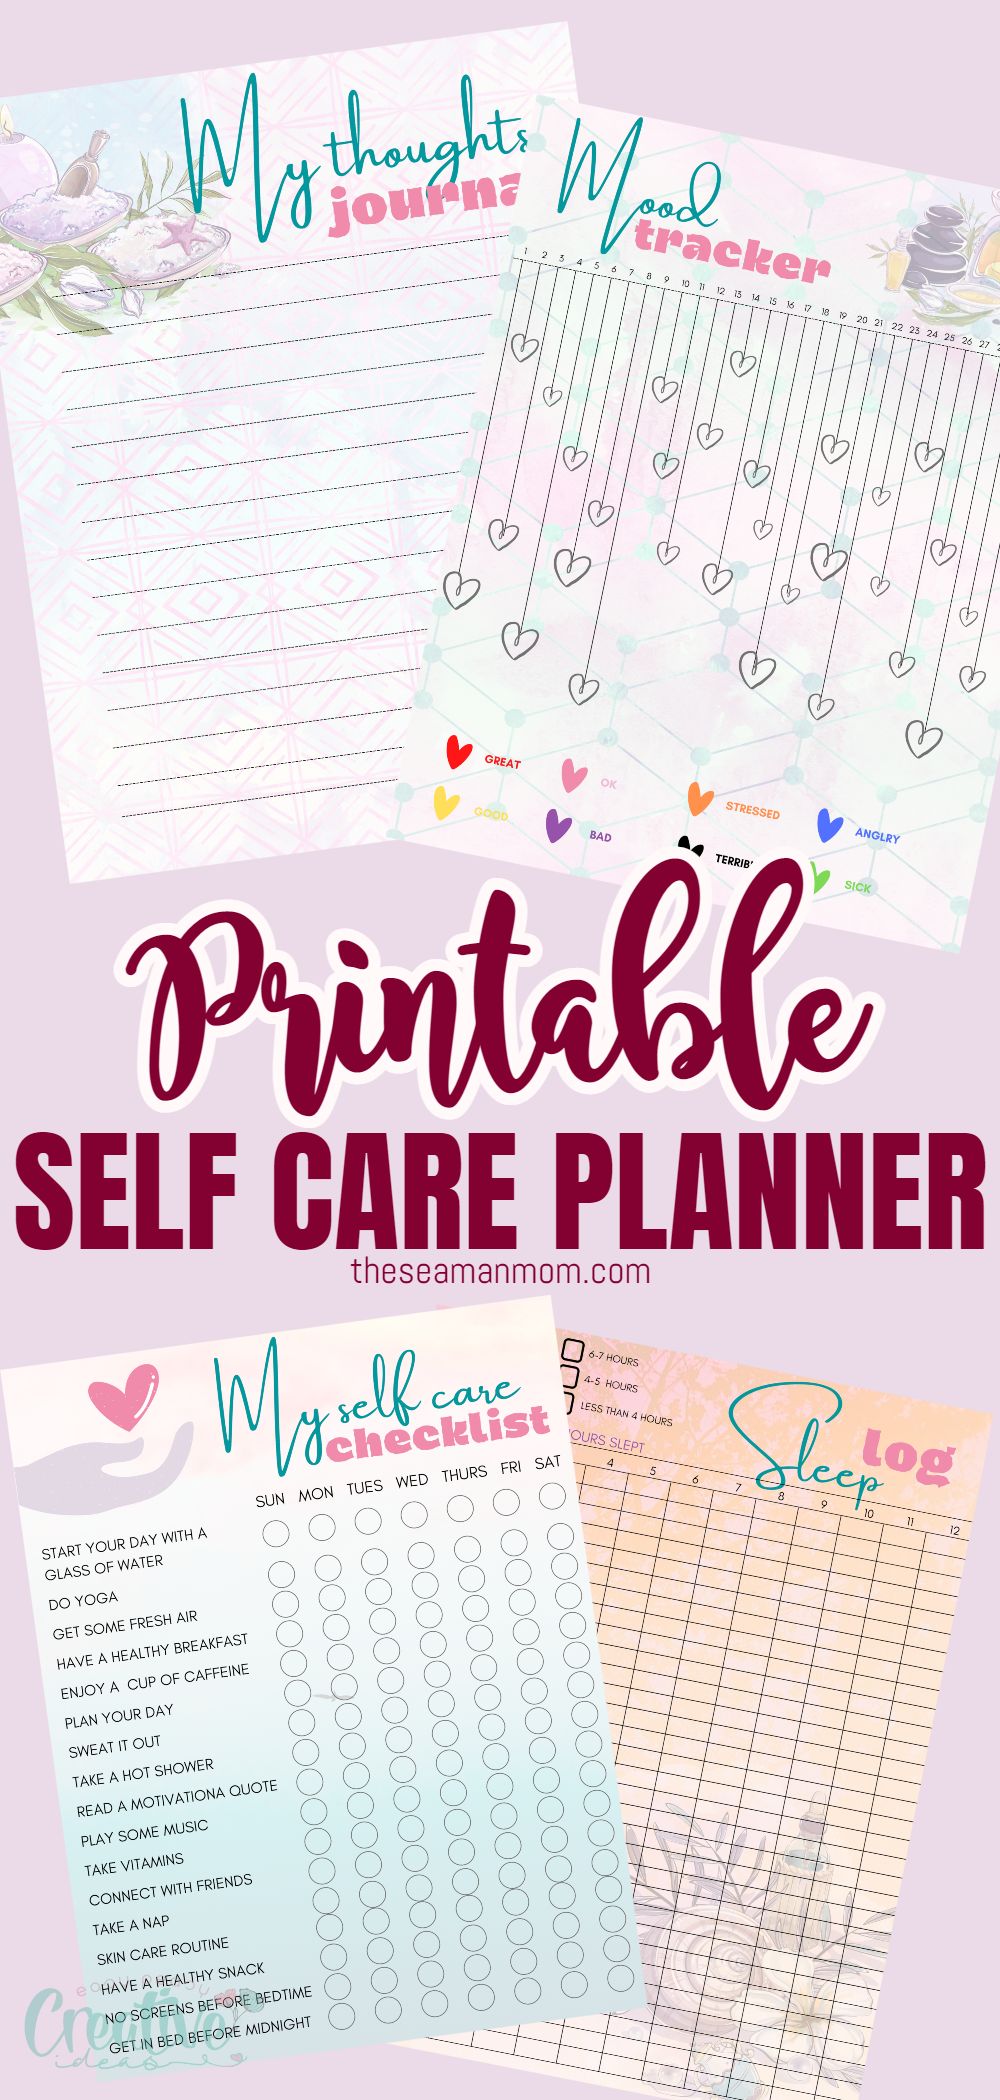 Instead of trying to work self-care into your busy schedule, why not make it a priority? With the help of this self care planner, you can keep track of all aspects of your health and well-being in one handy spot. via @petroneagu